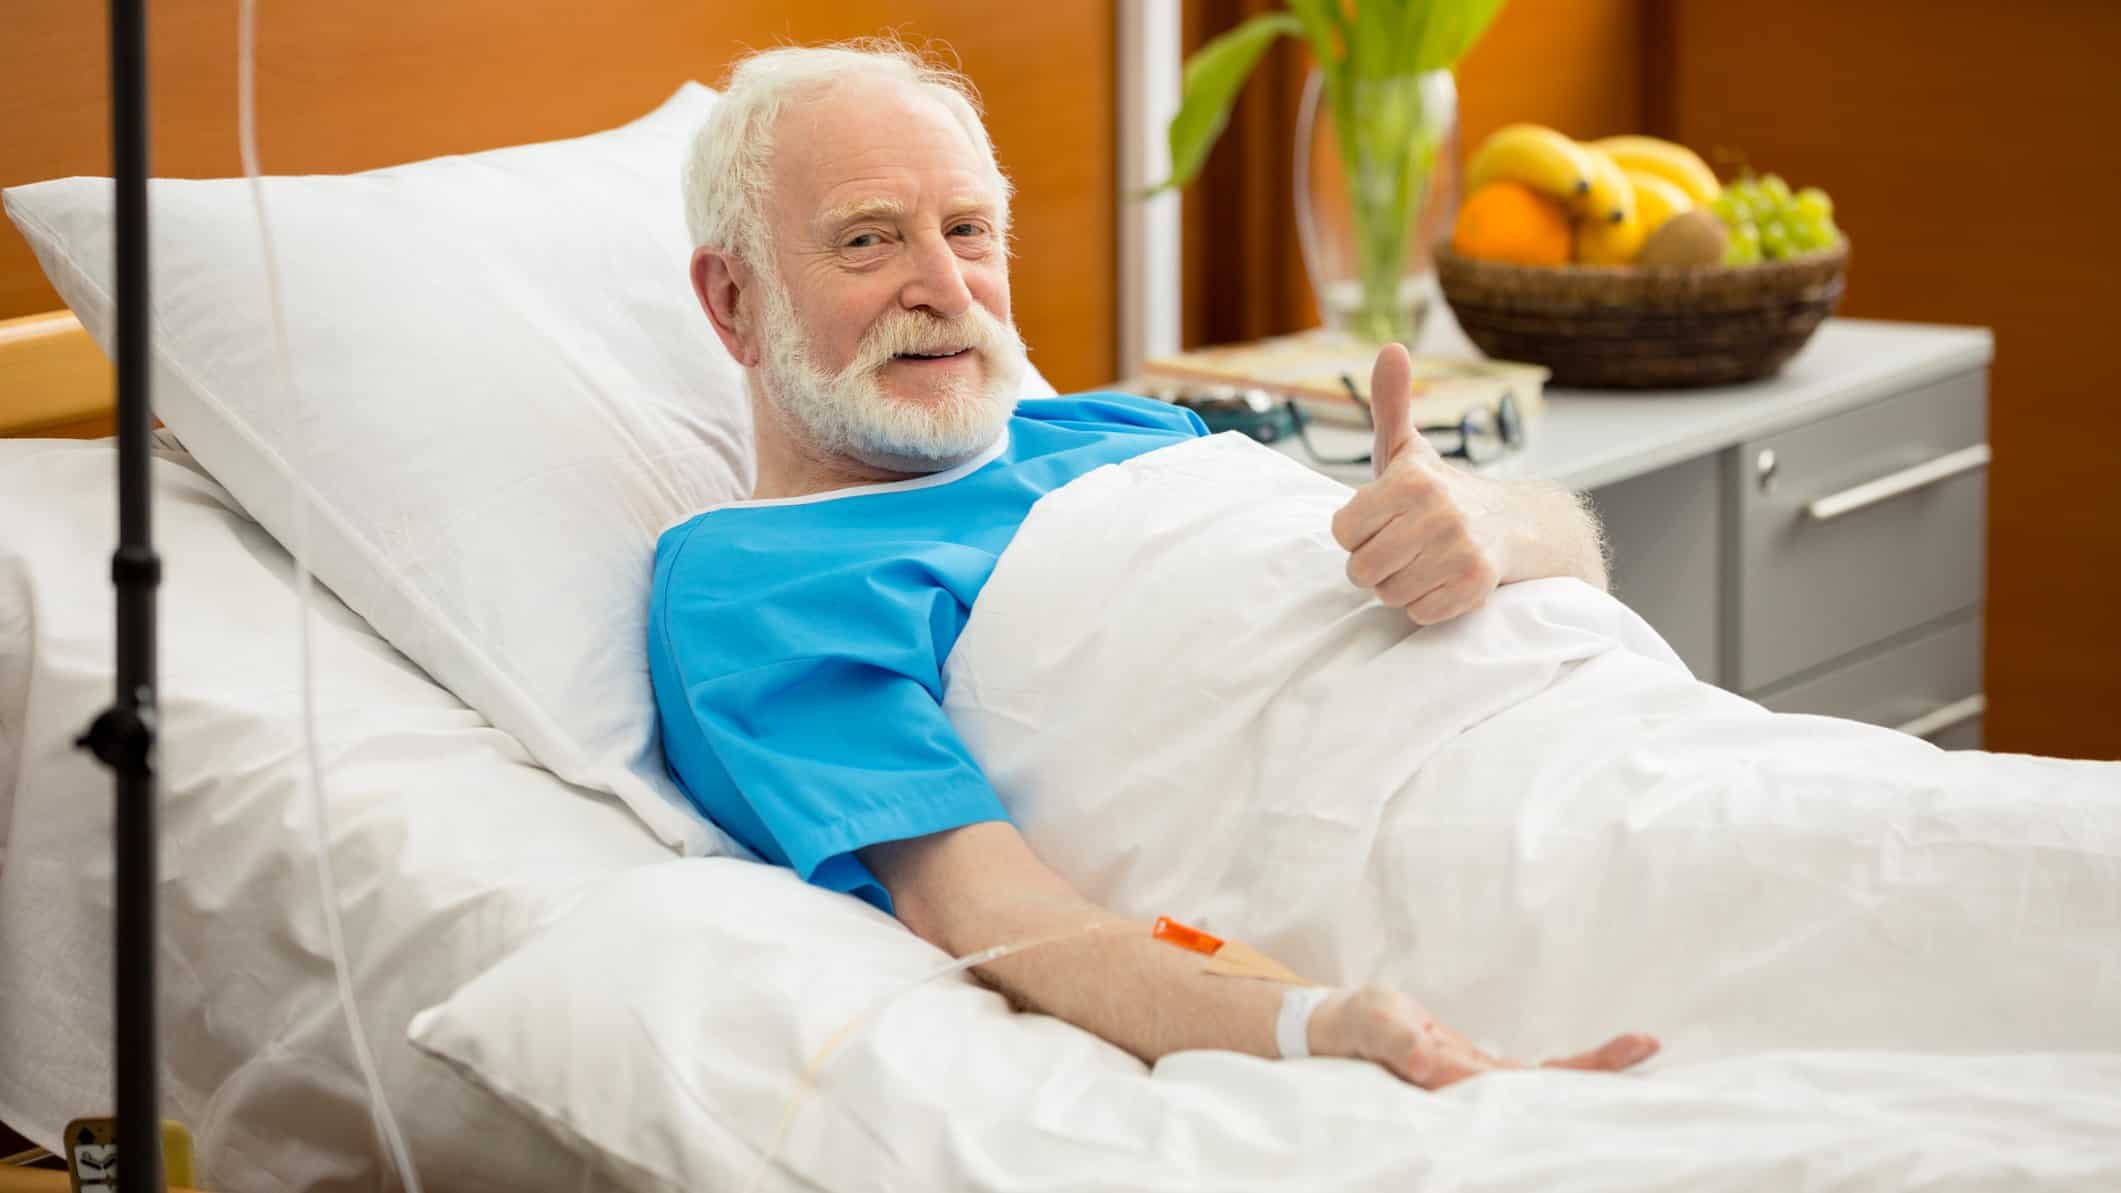 a man in a hospital bed on a drip gives a thumbs up sign while reclining with a bedside table containing a plant and fruit in the background.